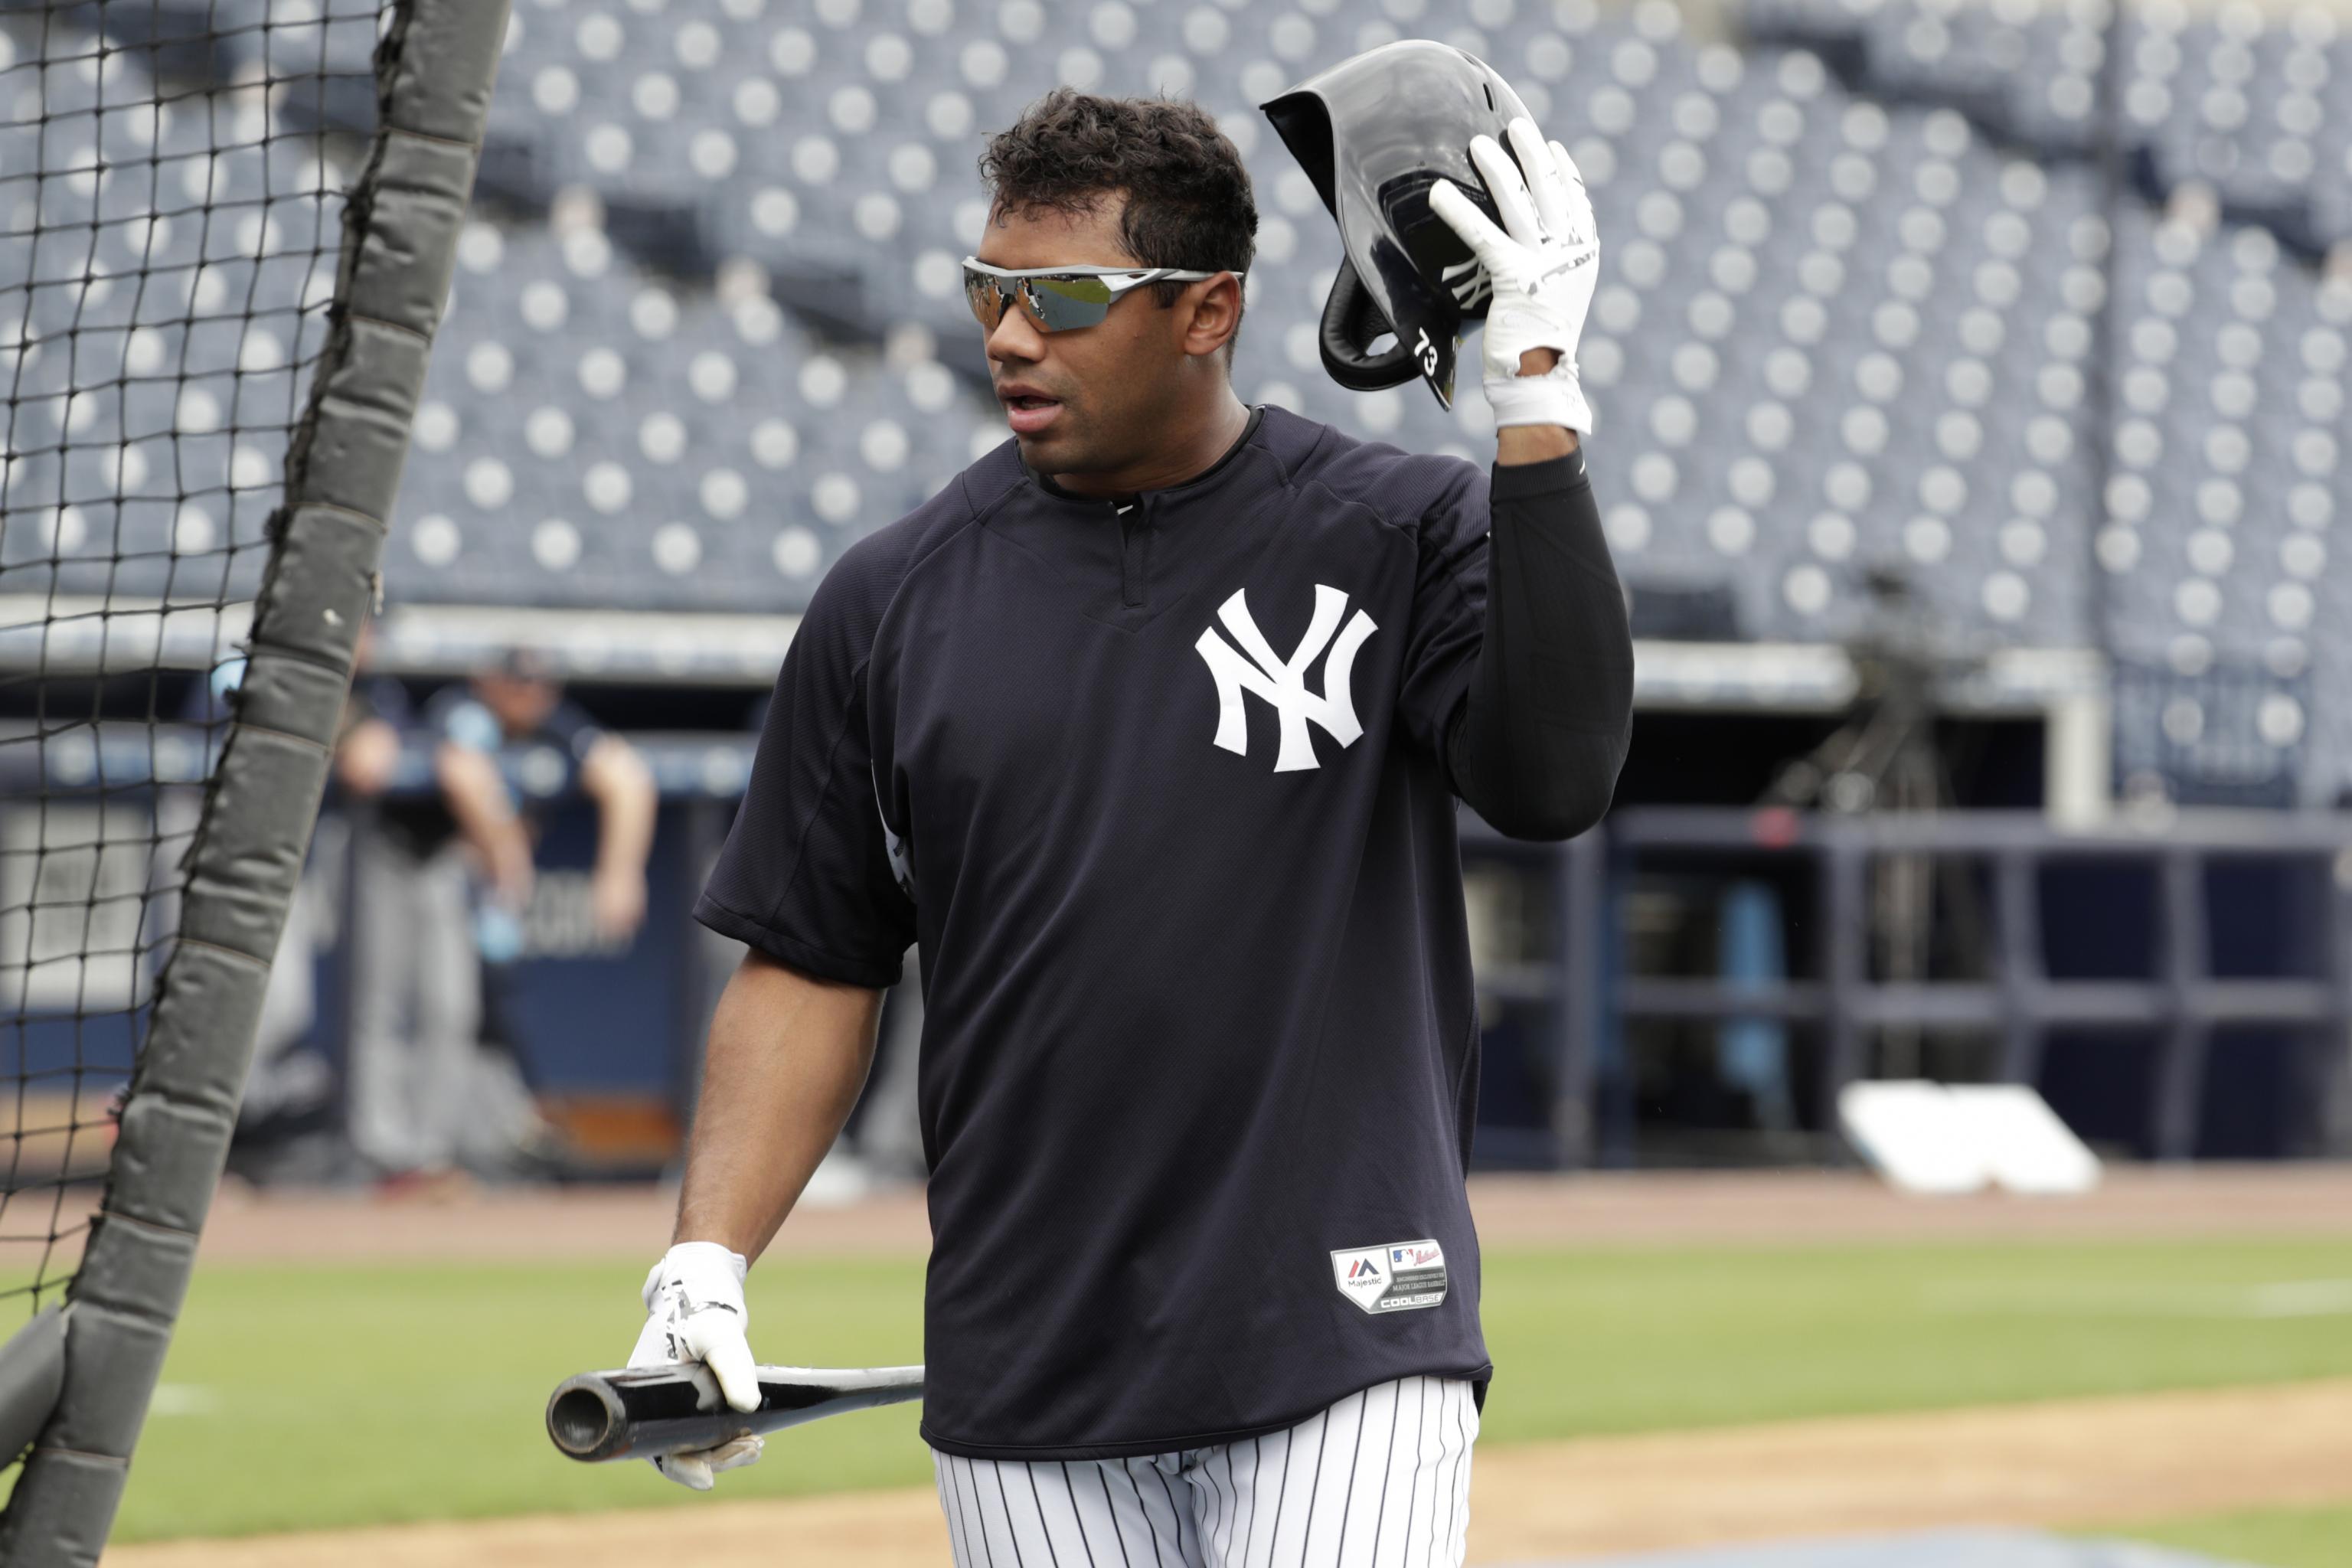 Russell Wilson: I haven't given up baseball, may play both sports